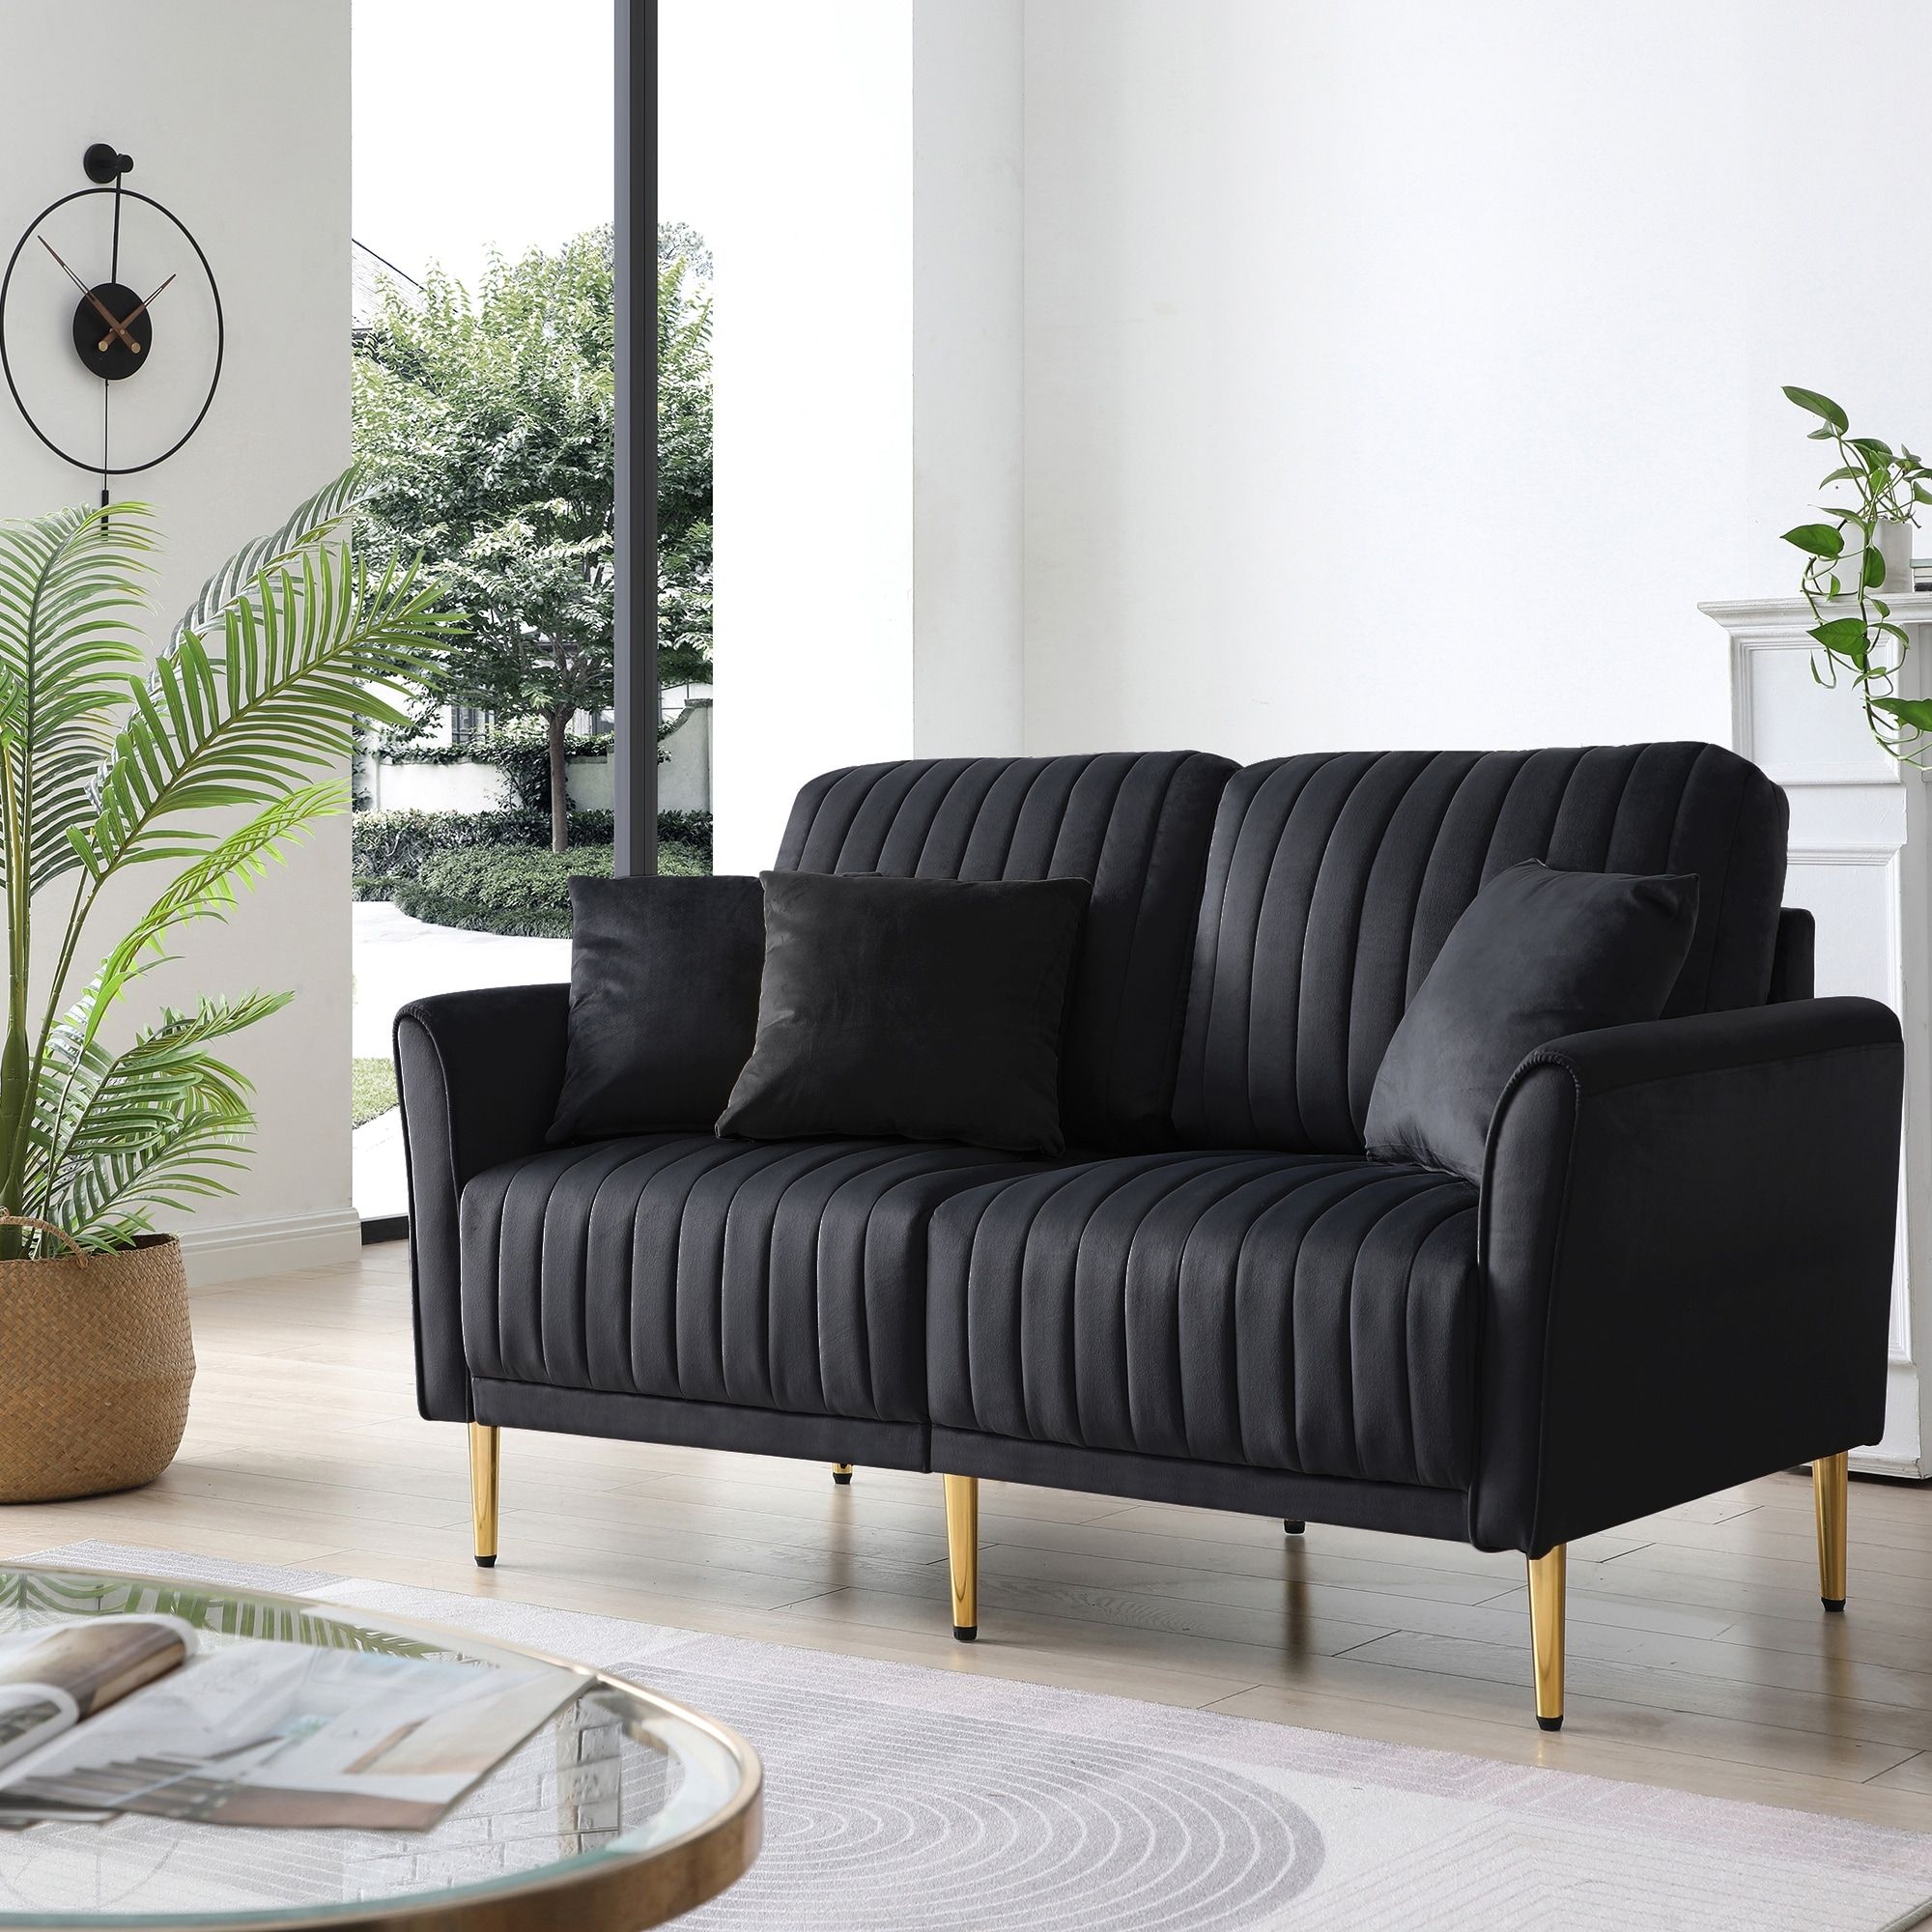 Velvet Upholstered Loveseat Sofa, Tufted Back 2 Seater Sofa Couch – On Sale  – Bed Bath & Beyond – 38314515 With Regard To 2 Seater Black Velvet Sofa Beds (Photo 2 of 15)